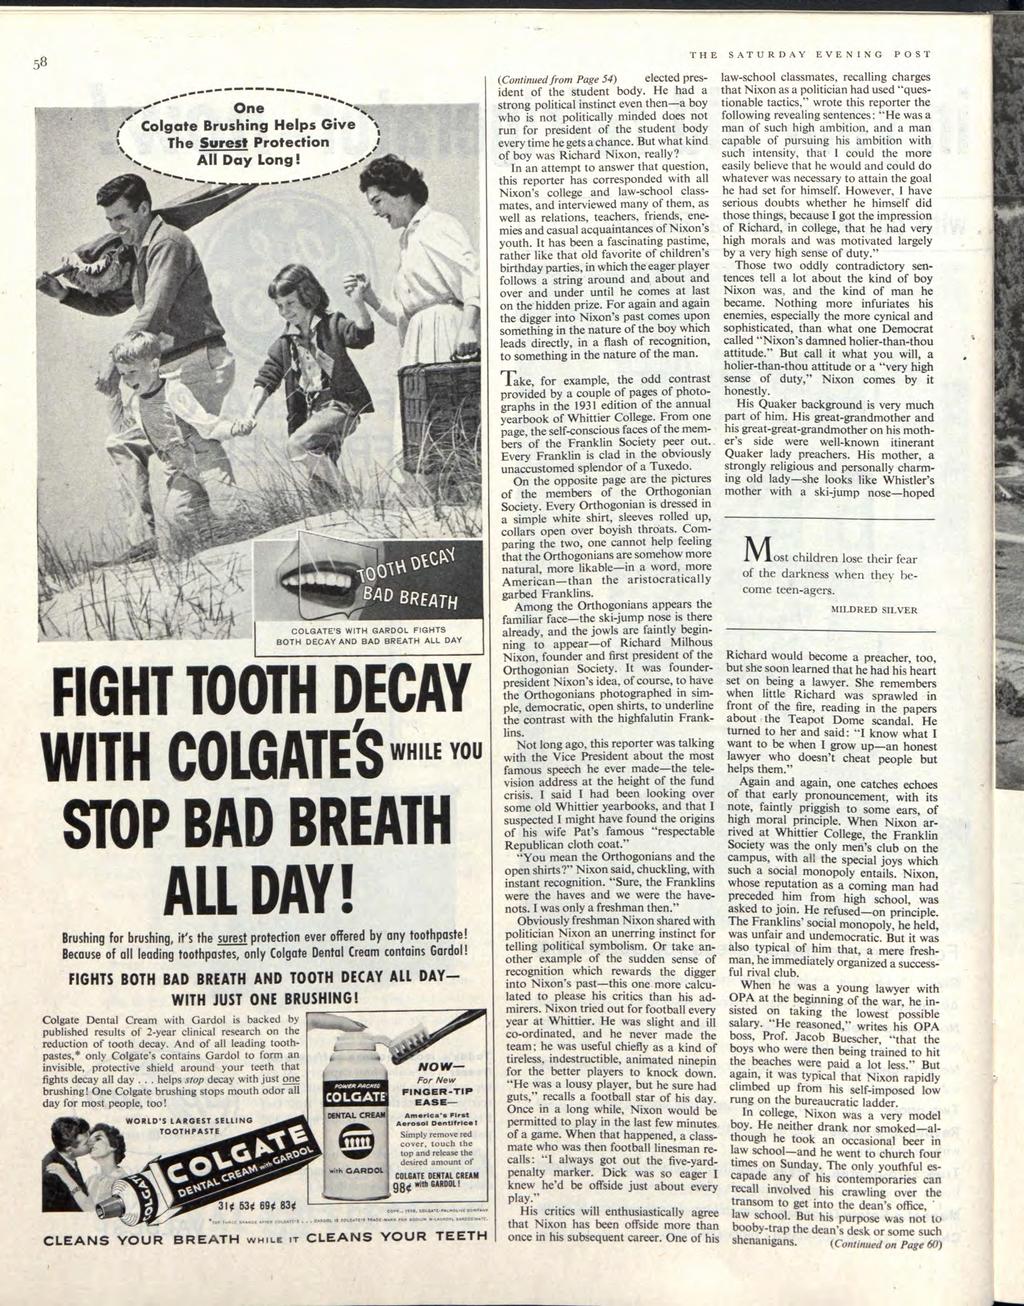 58 ----- One 01114.. 4' Colgate Brushing Helps Give The Surest Protection All Day Long! ~~_.11. woo COLGATE'S WITH GARDOL FIGHTS BOTH DECAY AND BAD BREATH ALL DAY FIGHT TOOTH DECAY WITH COLGATE'S WHILE YOU STOP BAD BREATH ALL DAY!